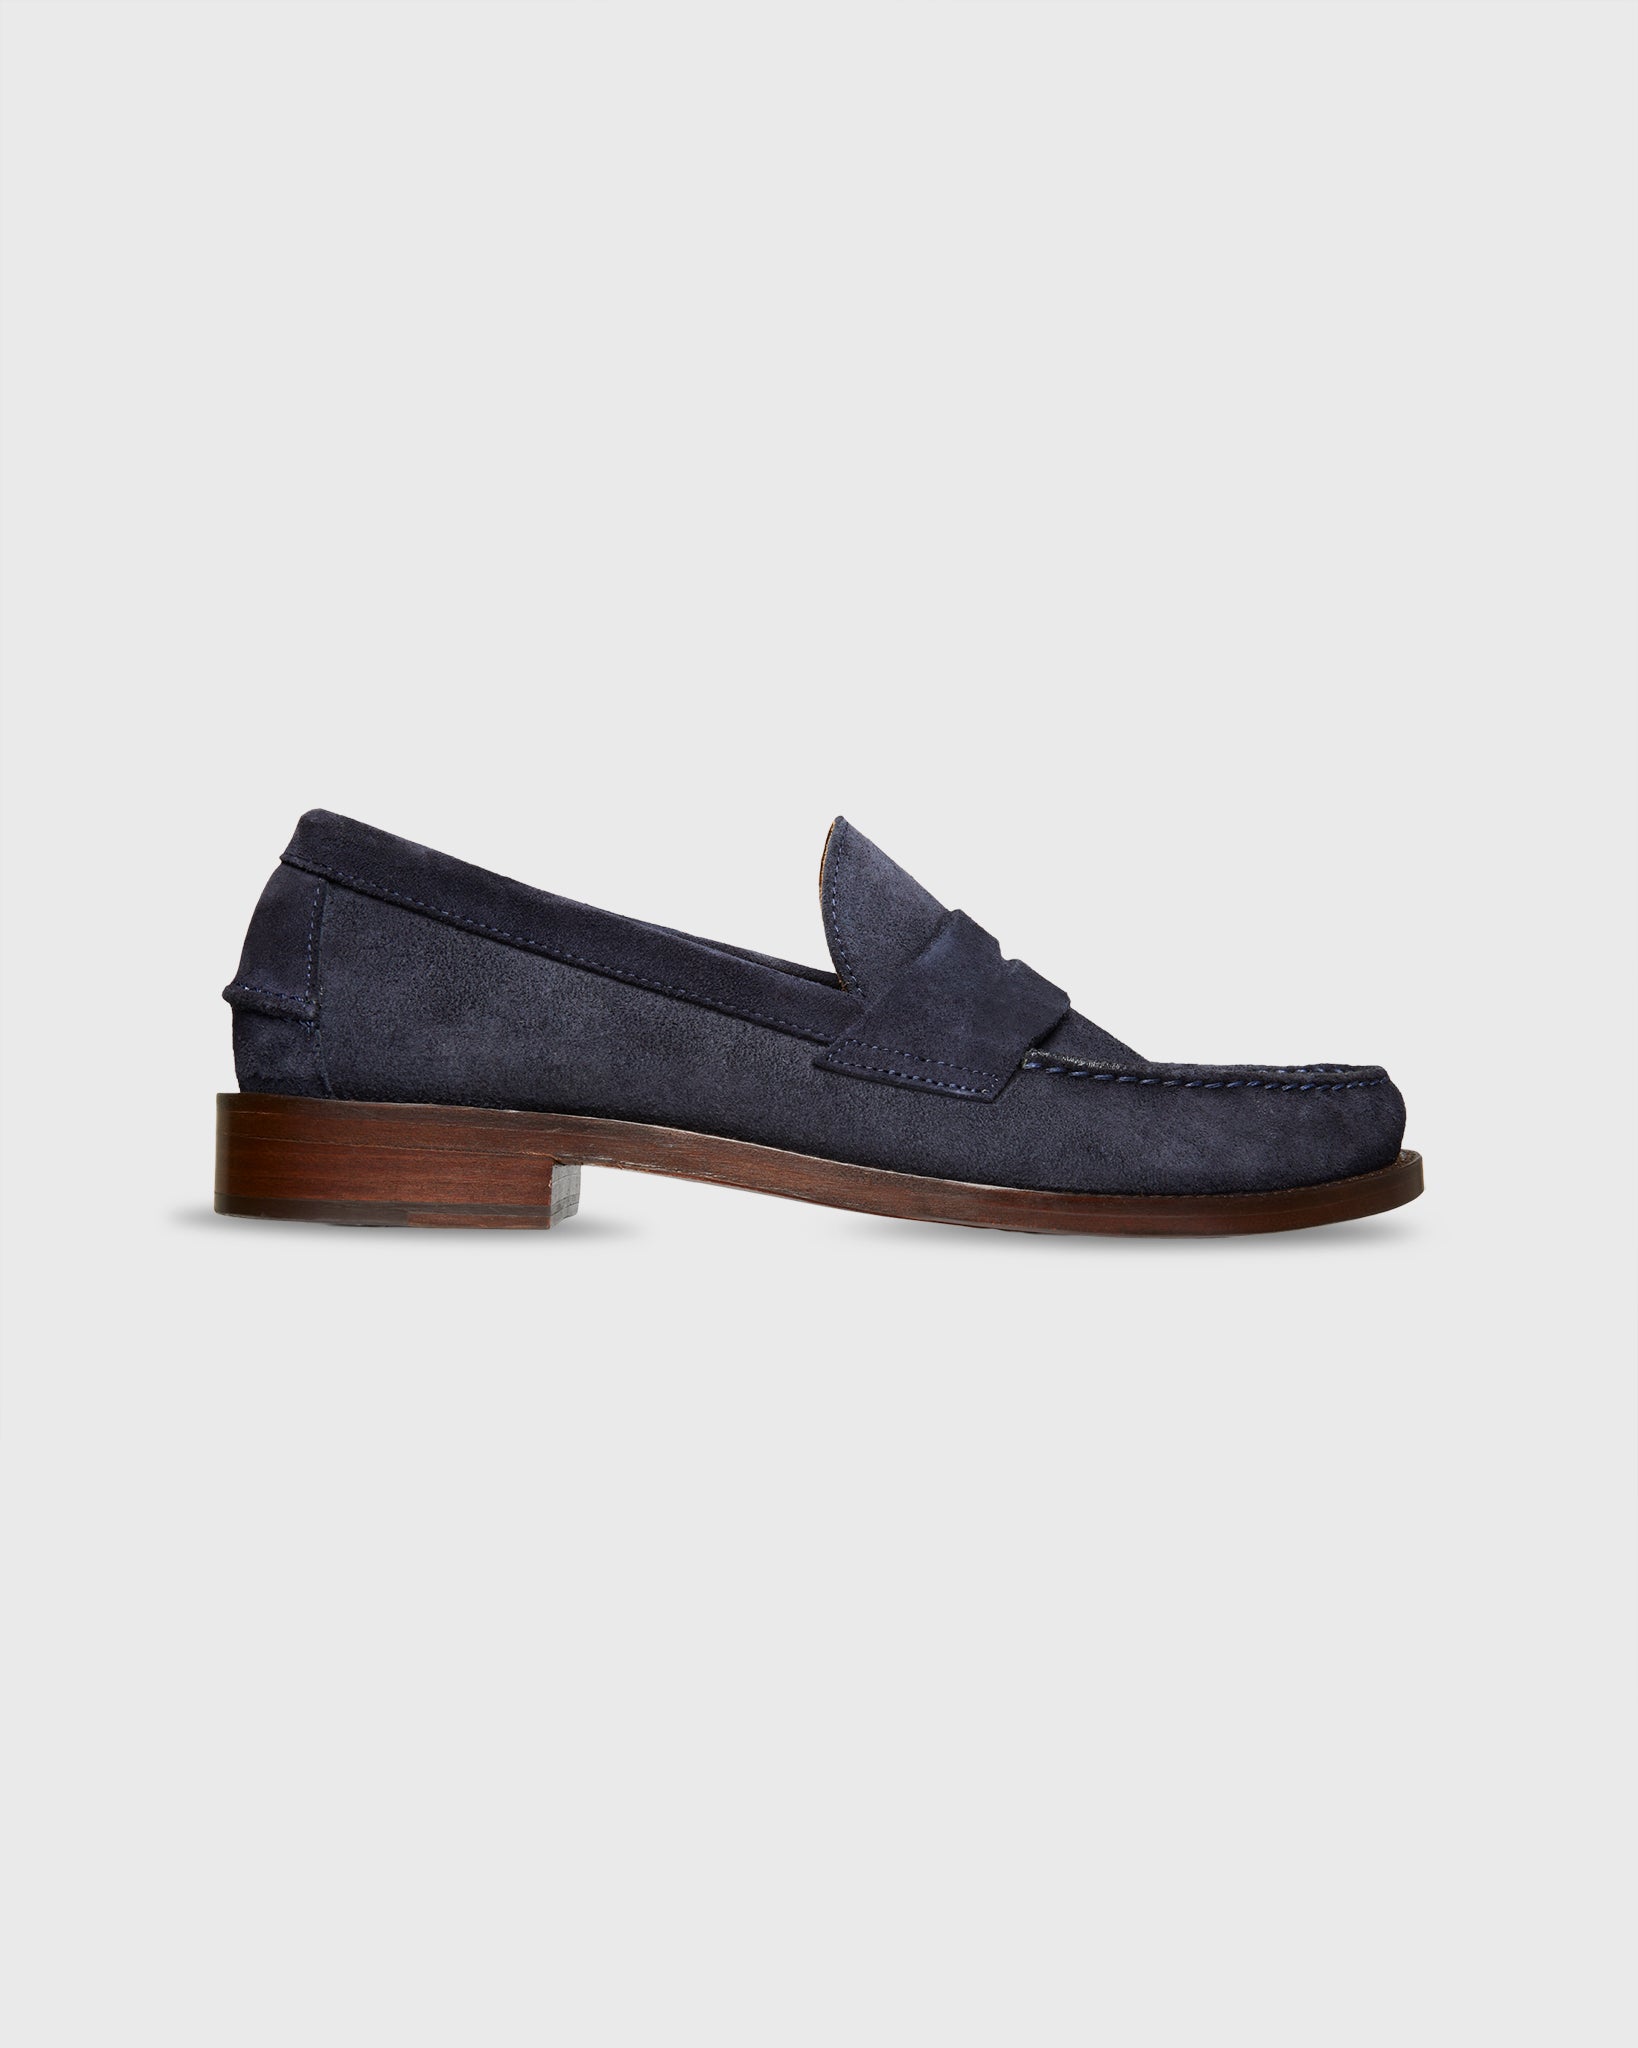 Handsewn Penny Loafer in Navy Suede